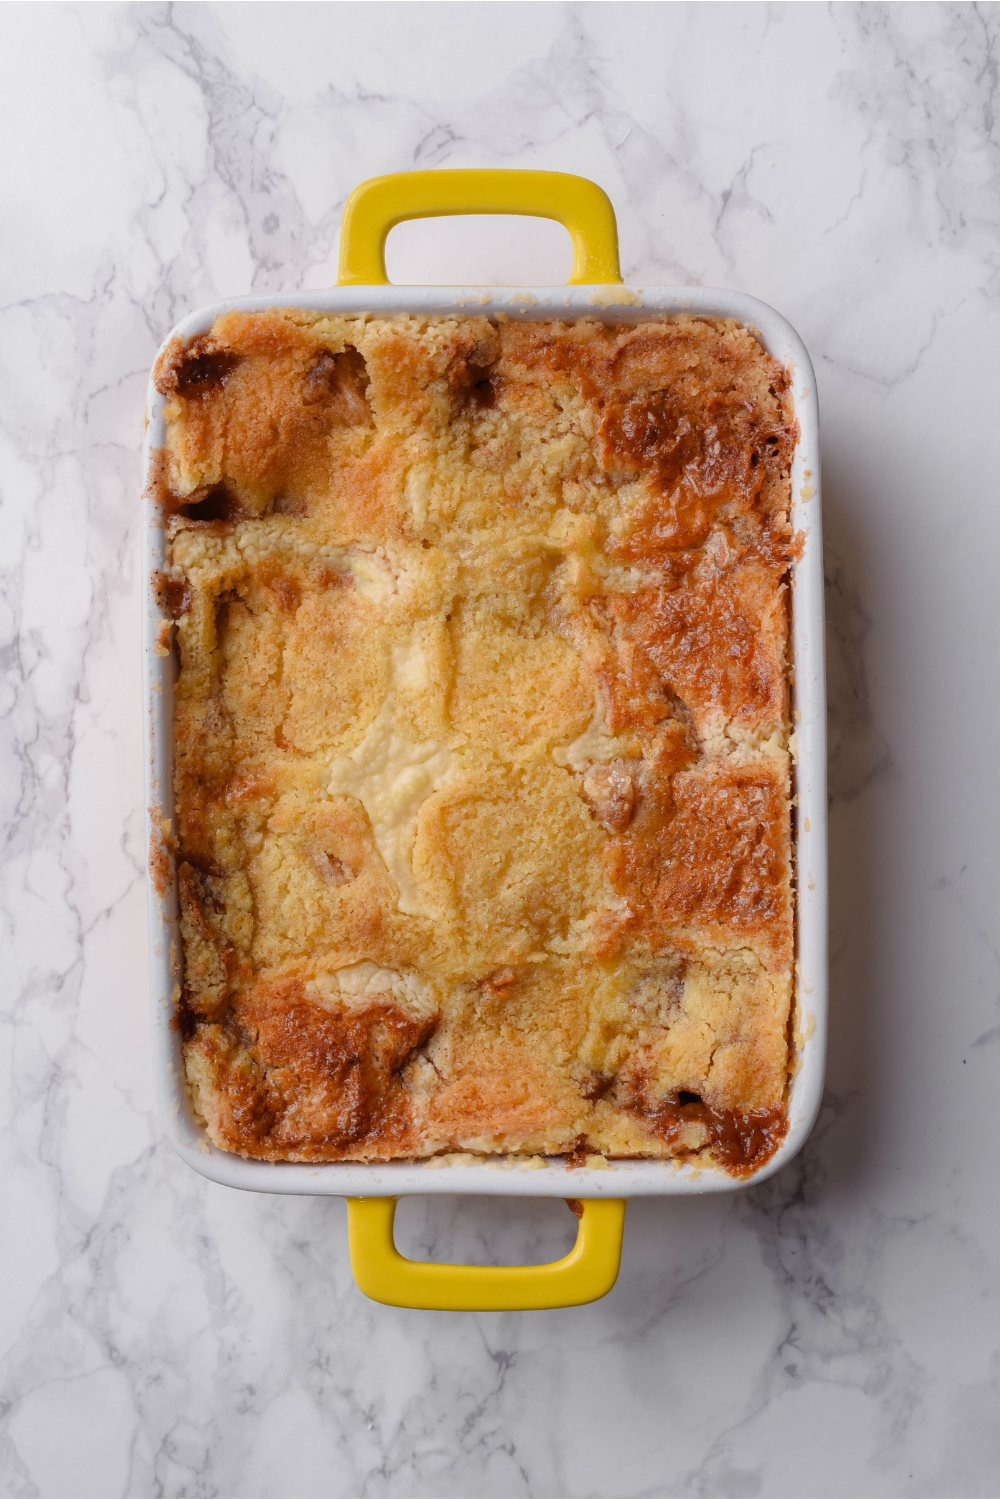 A baking dish filled with freshly baked dump cake covered in a golden brown cake topping.